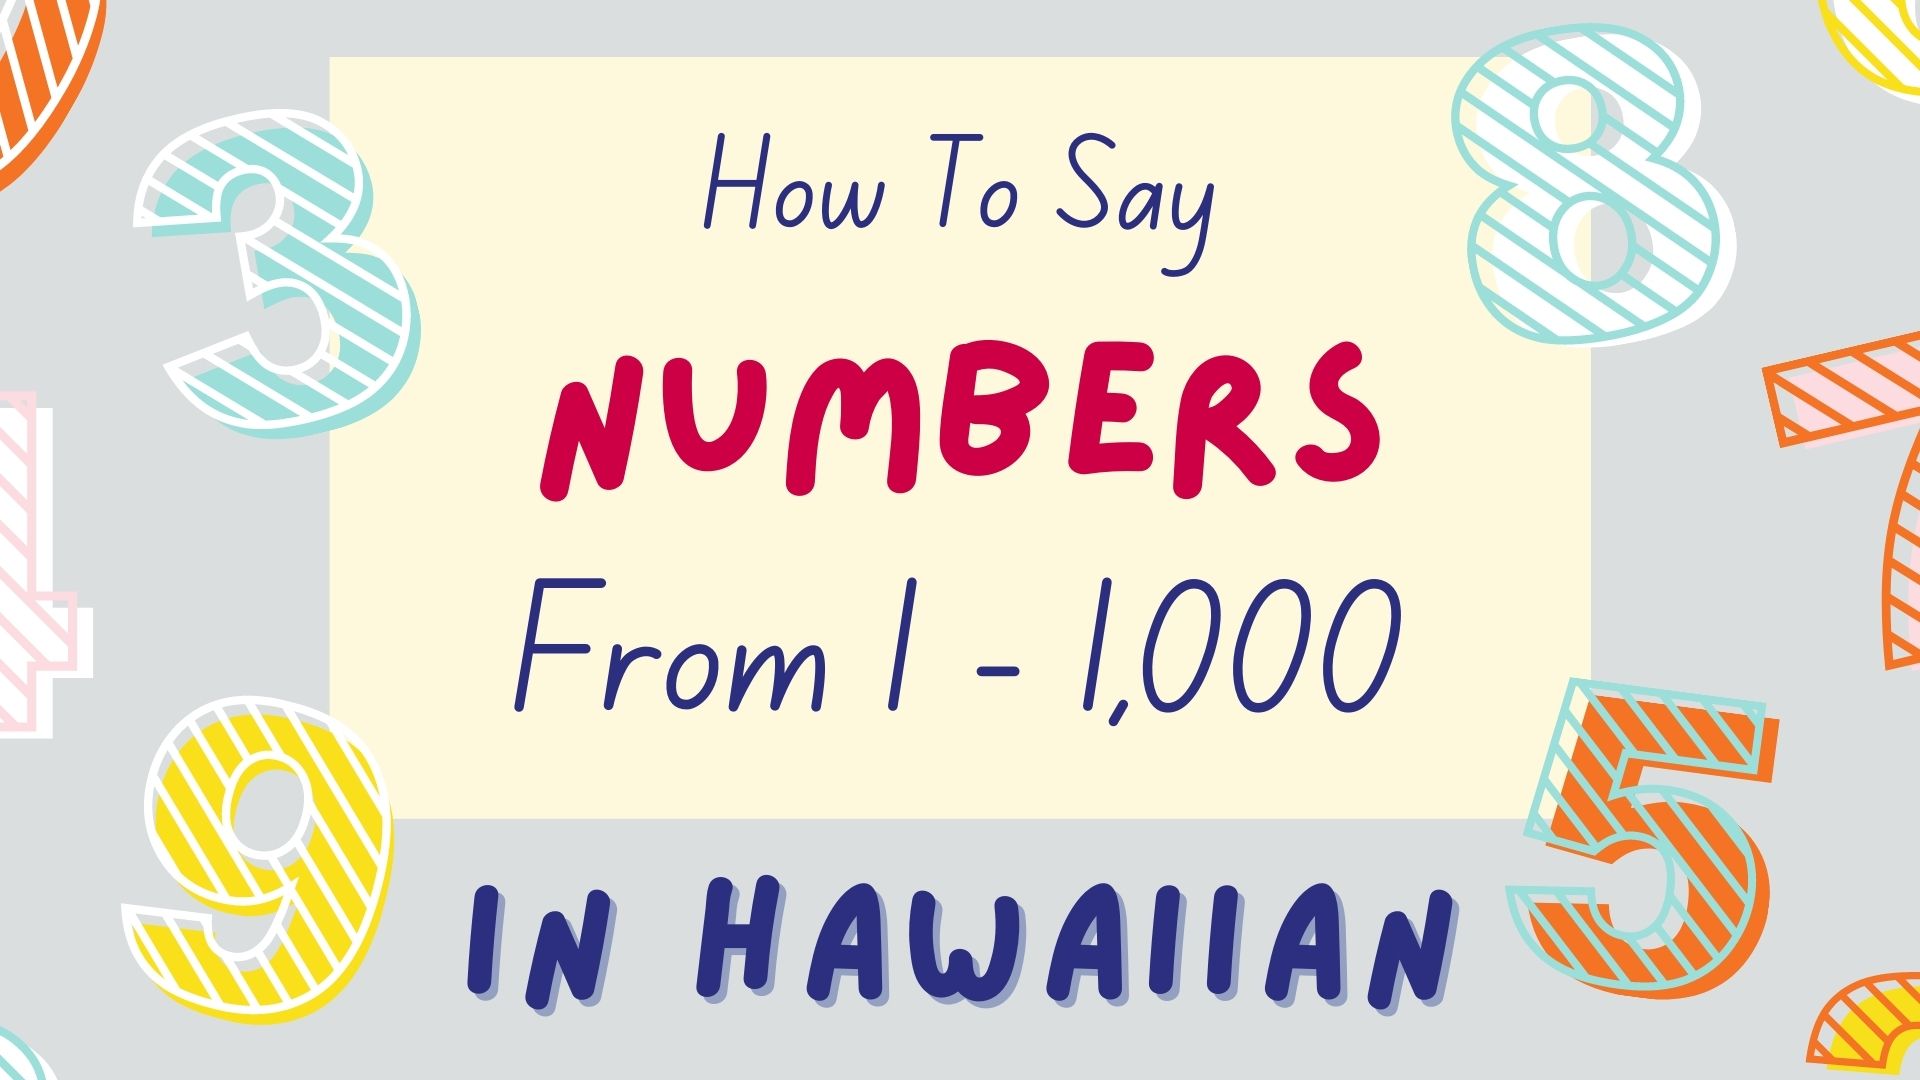 numbers-in-hawaiian-from-1-to-1000-how-to-count-in-hawaiian-lingalot